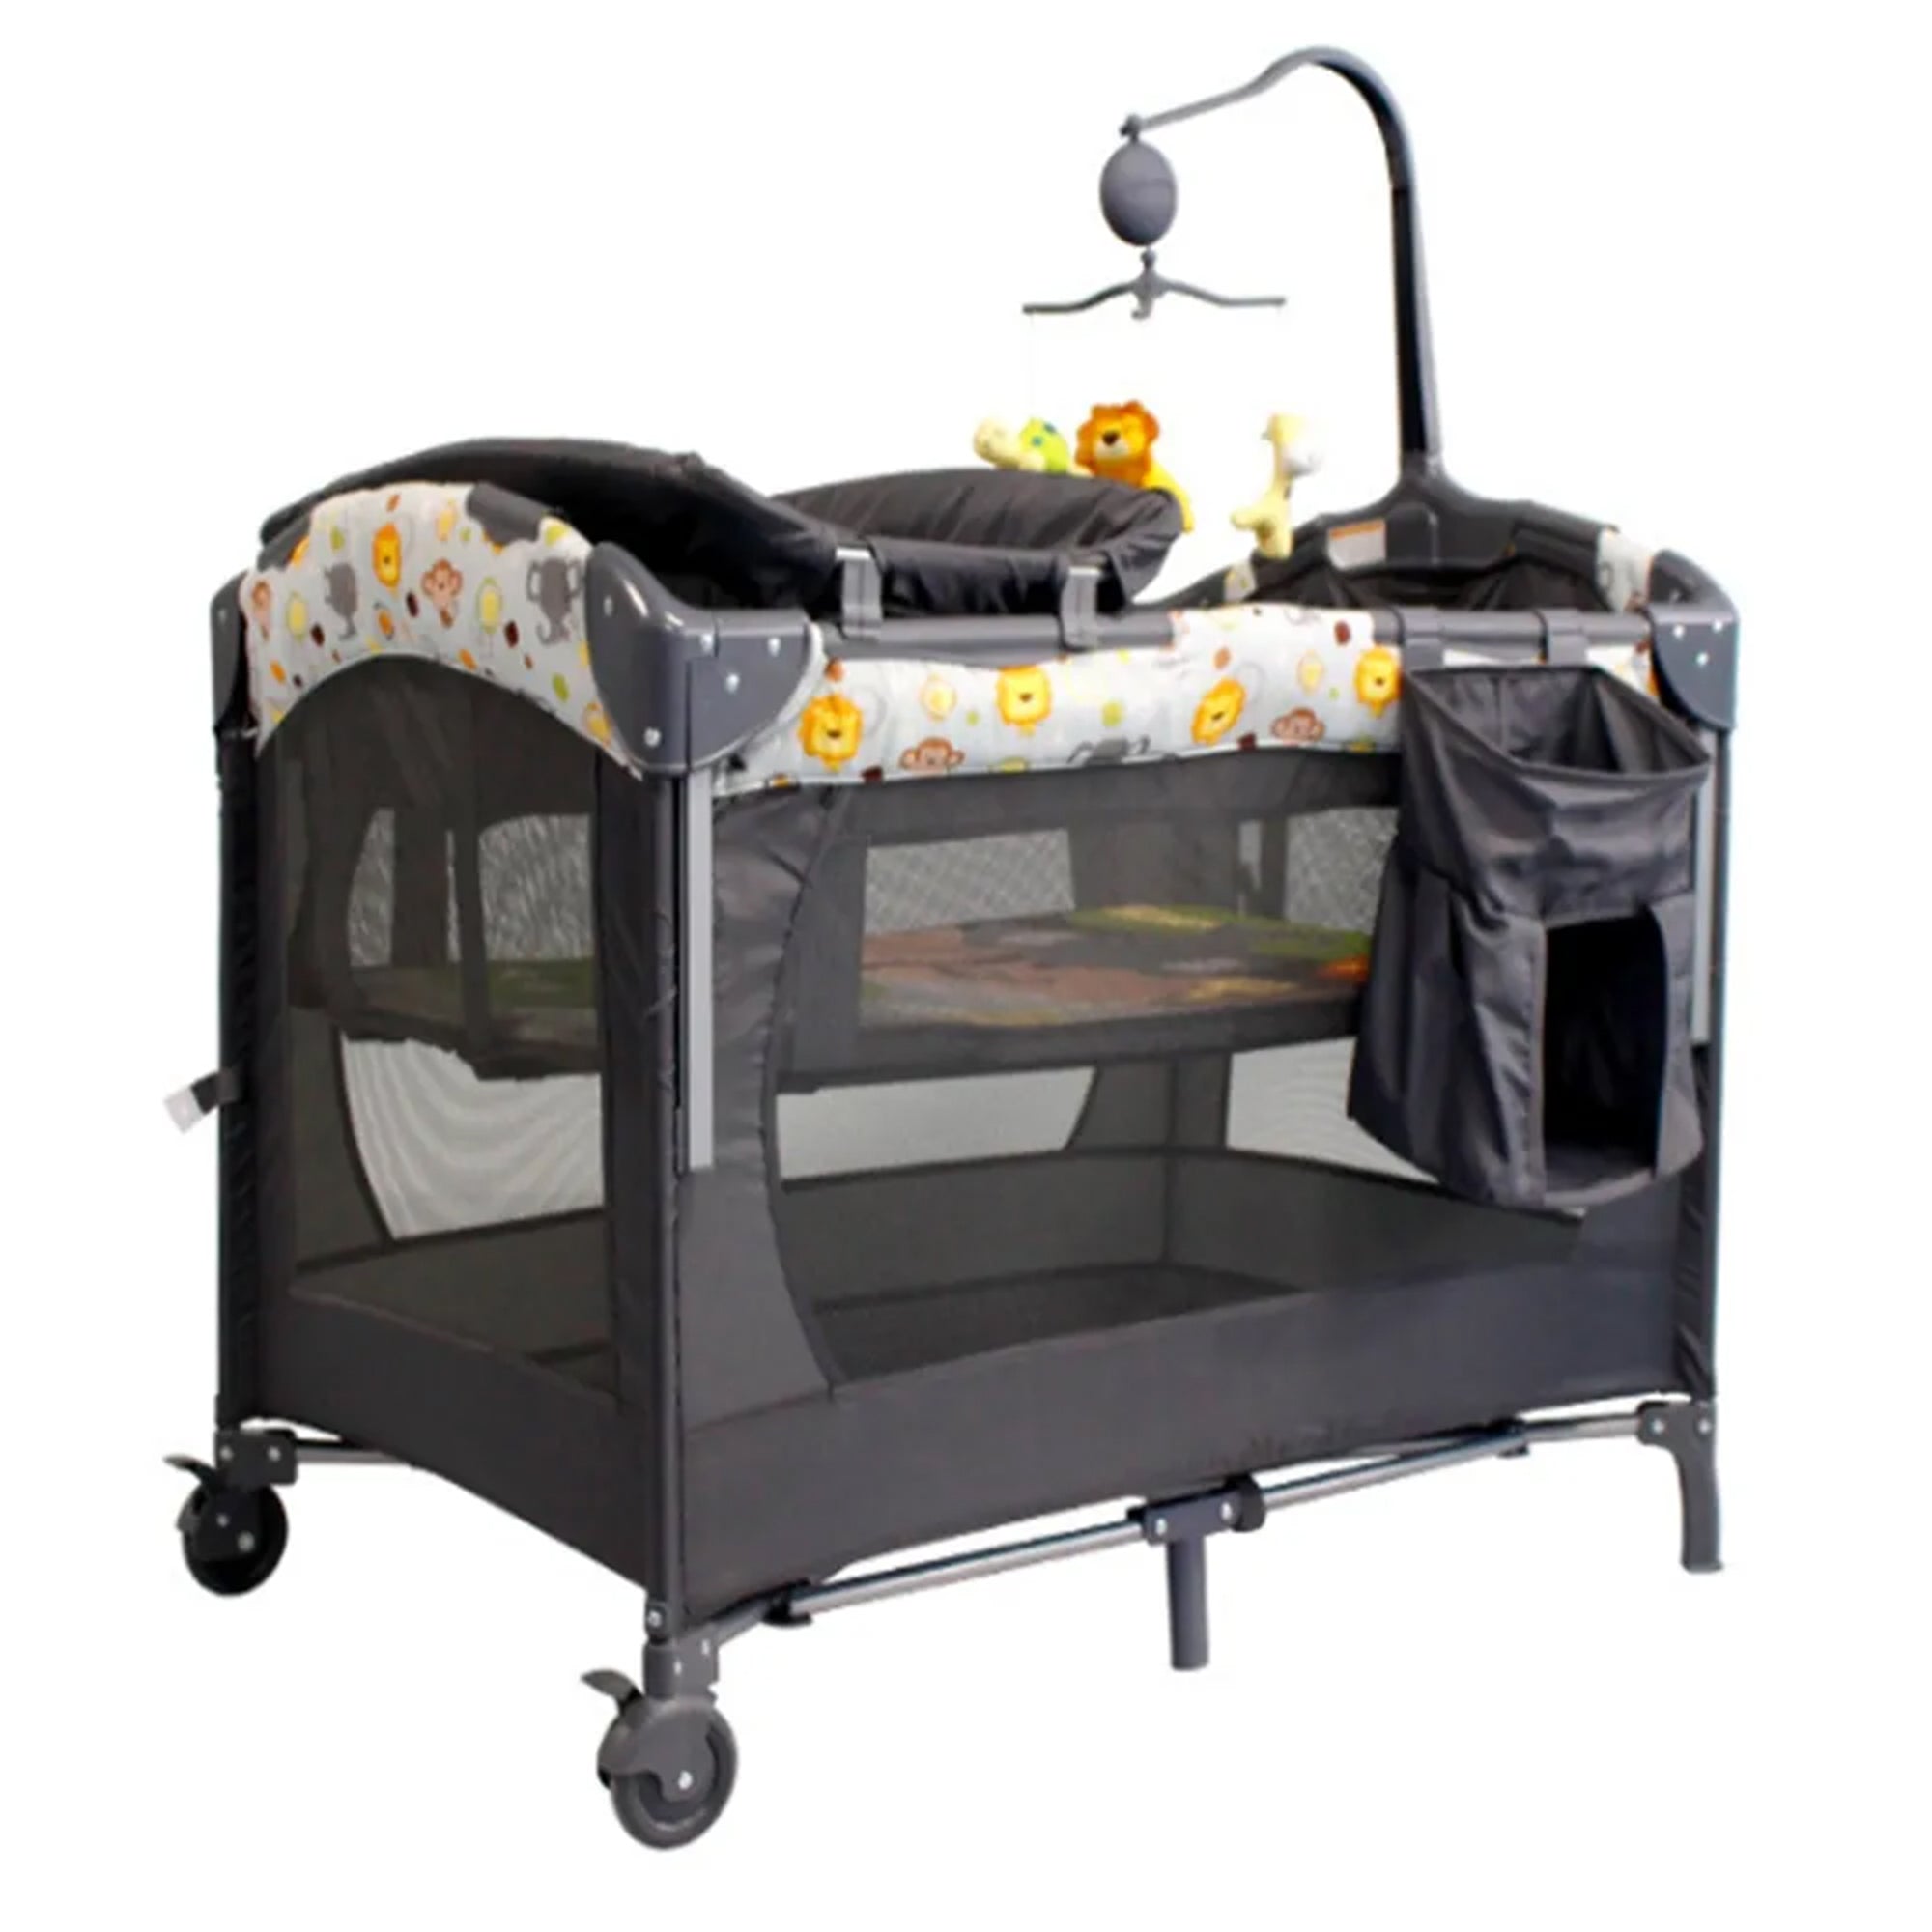 Babys Best Foldable Children’s Travel Cot, Crafted with premium materials, Baby Bad